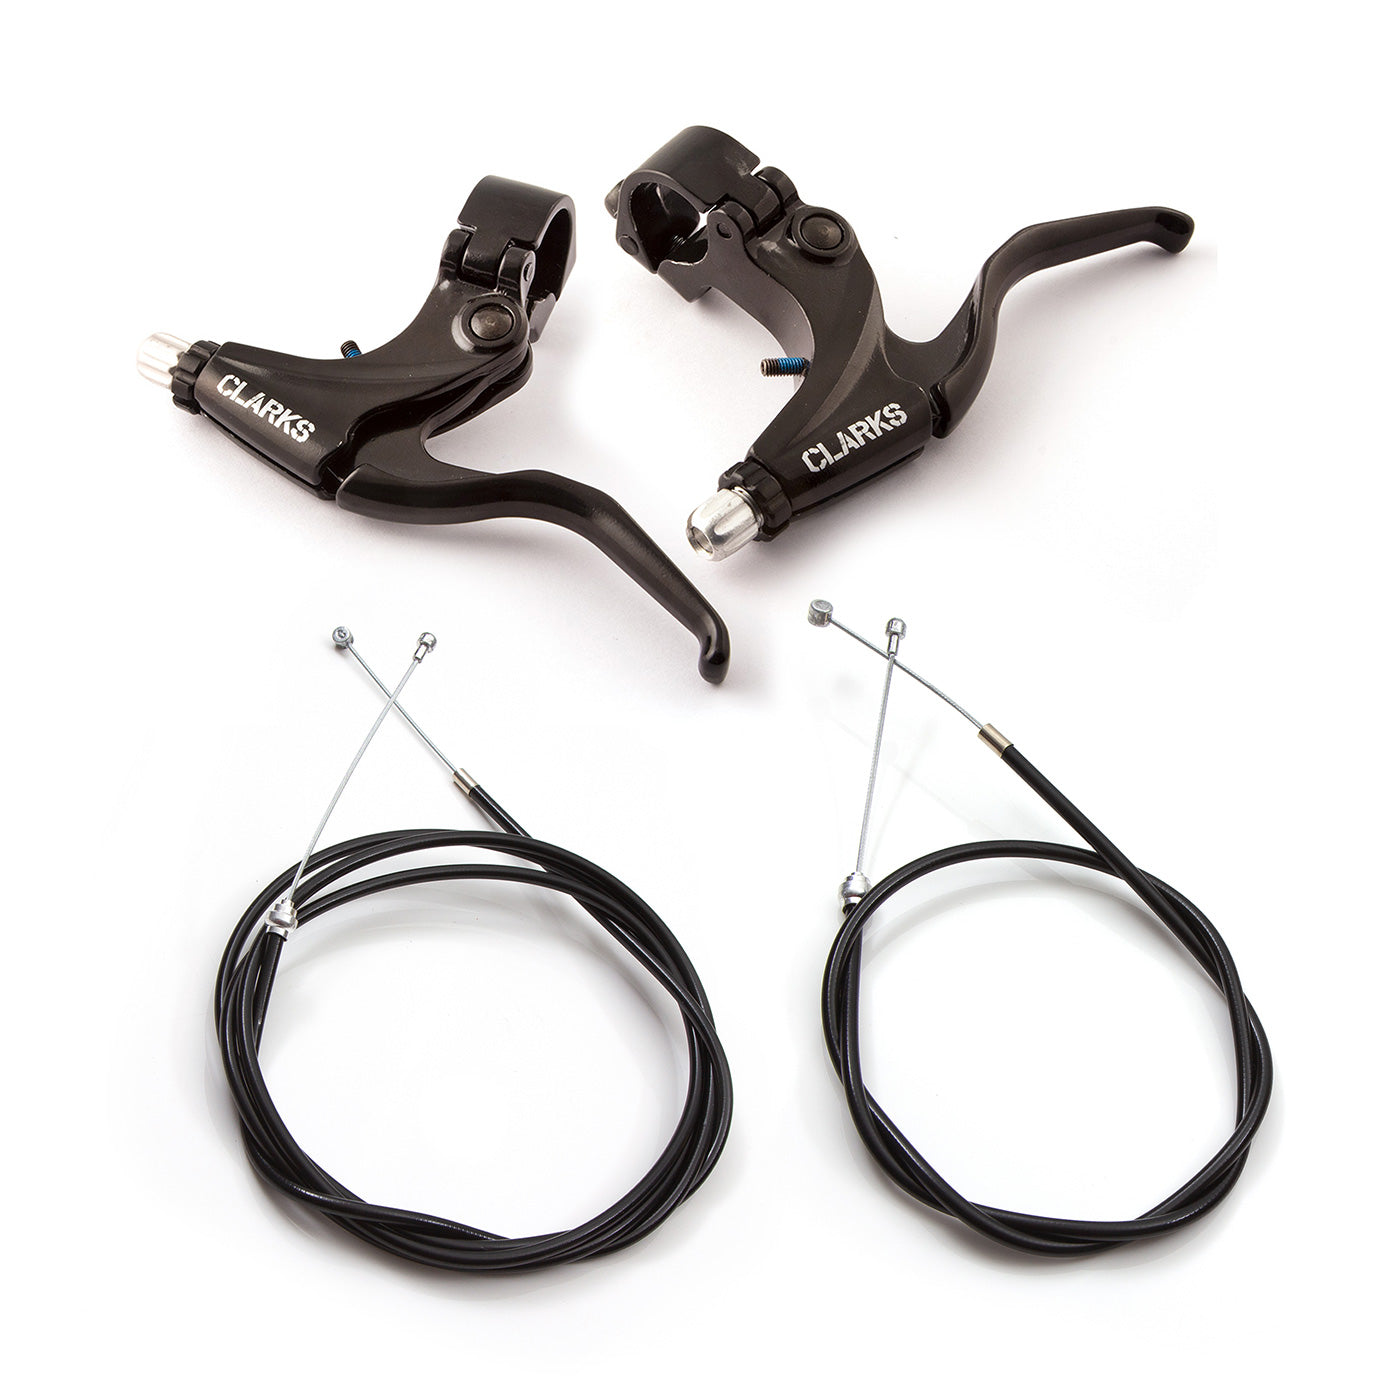 View Clarks VBrake levers with cables information